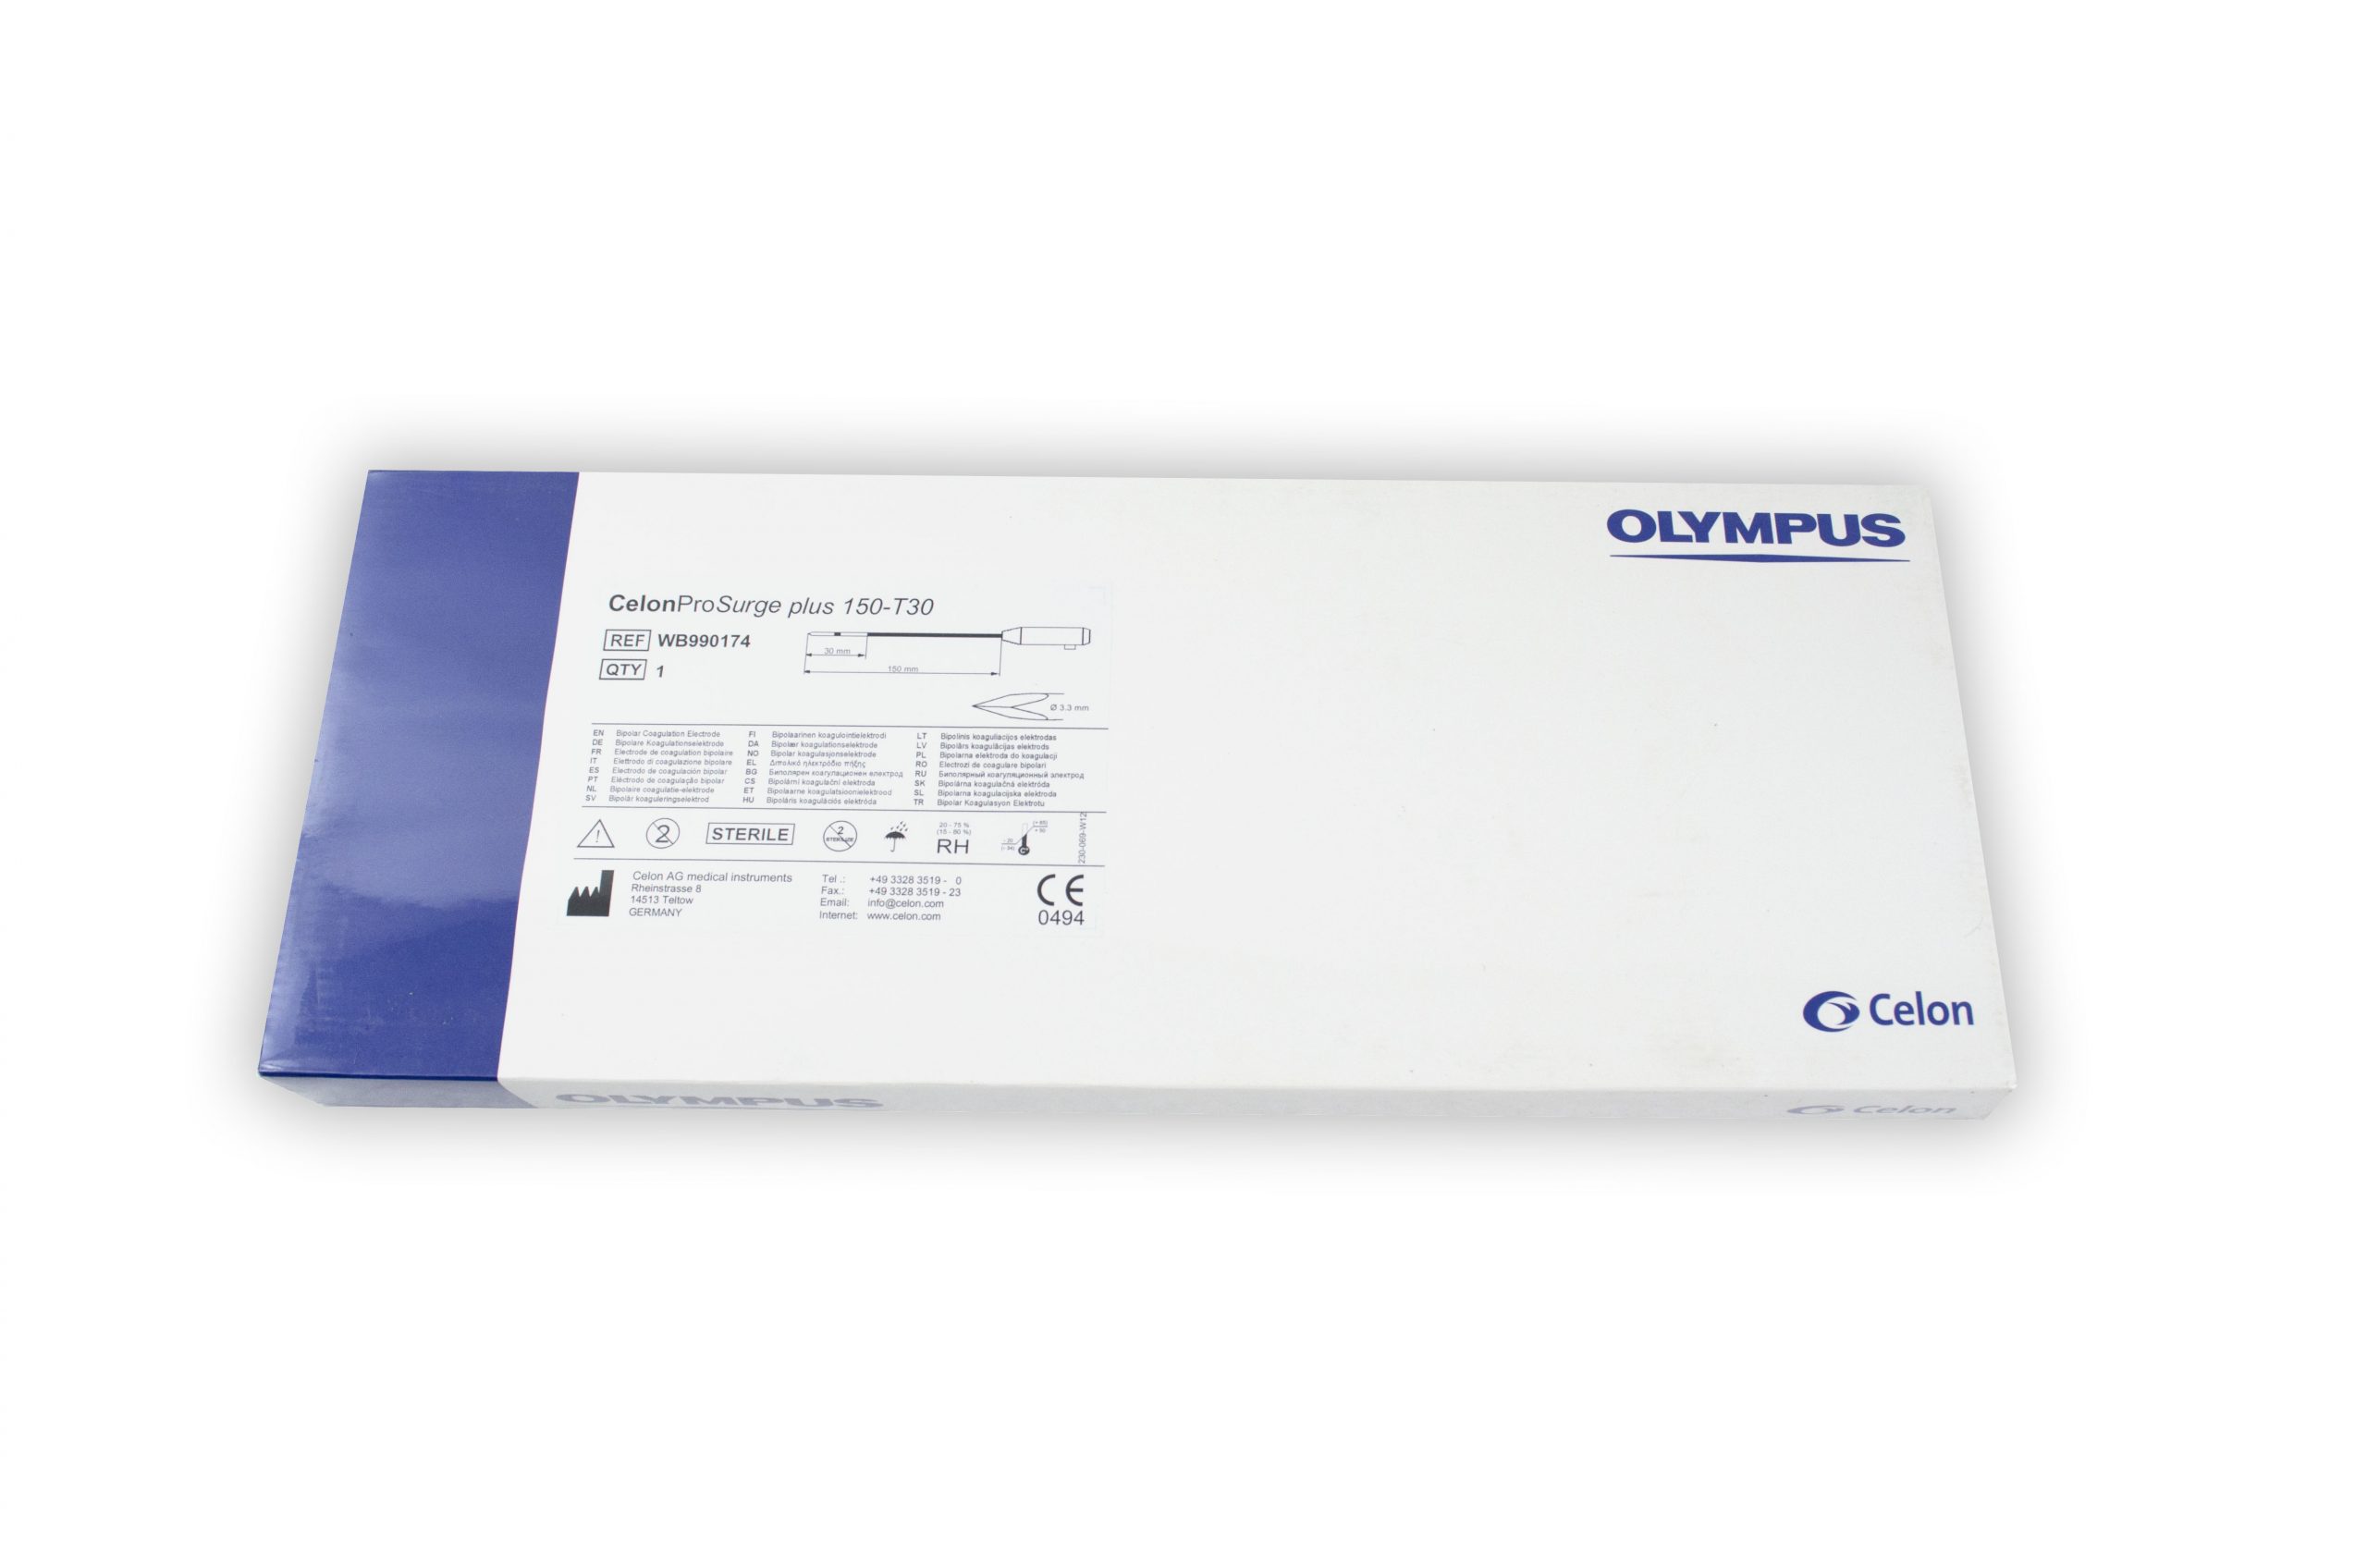 [Out-of-Date] Olympus Disposable Micro Applicator - WB990174